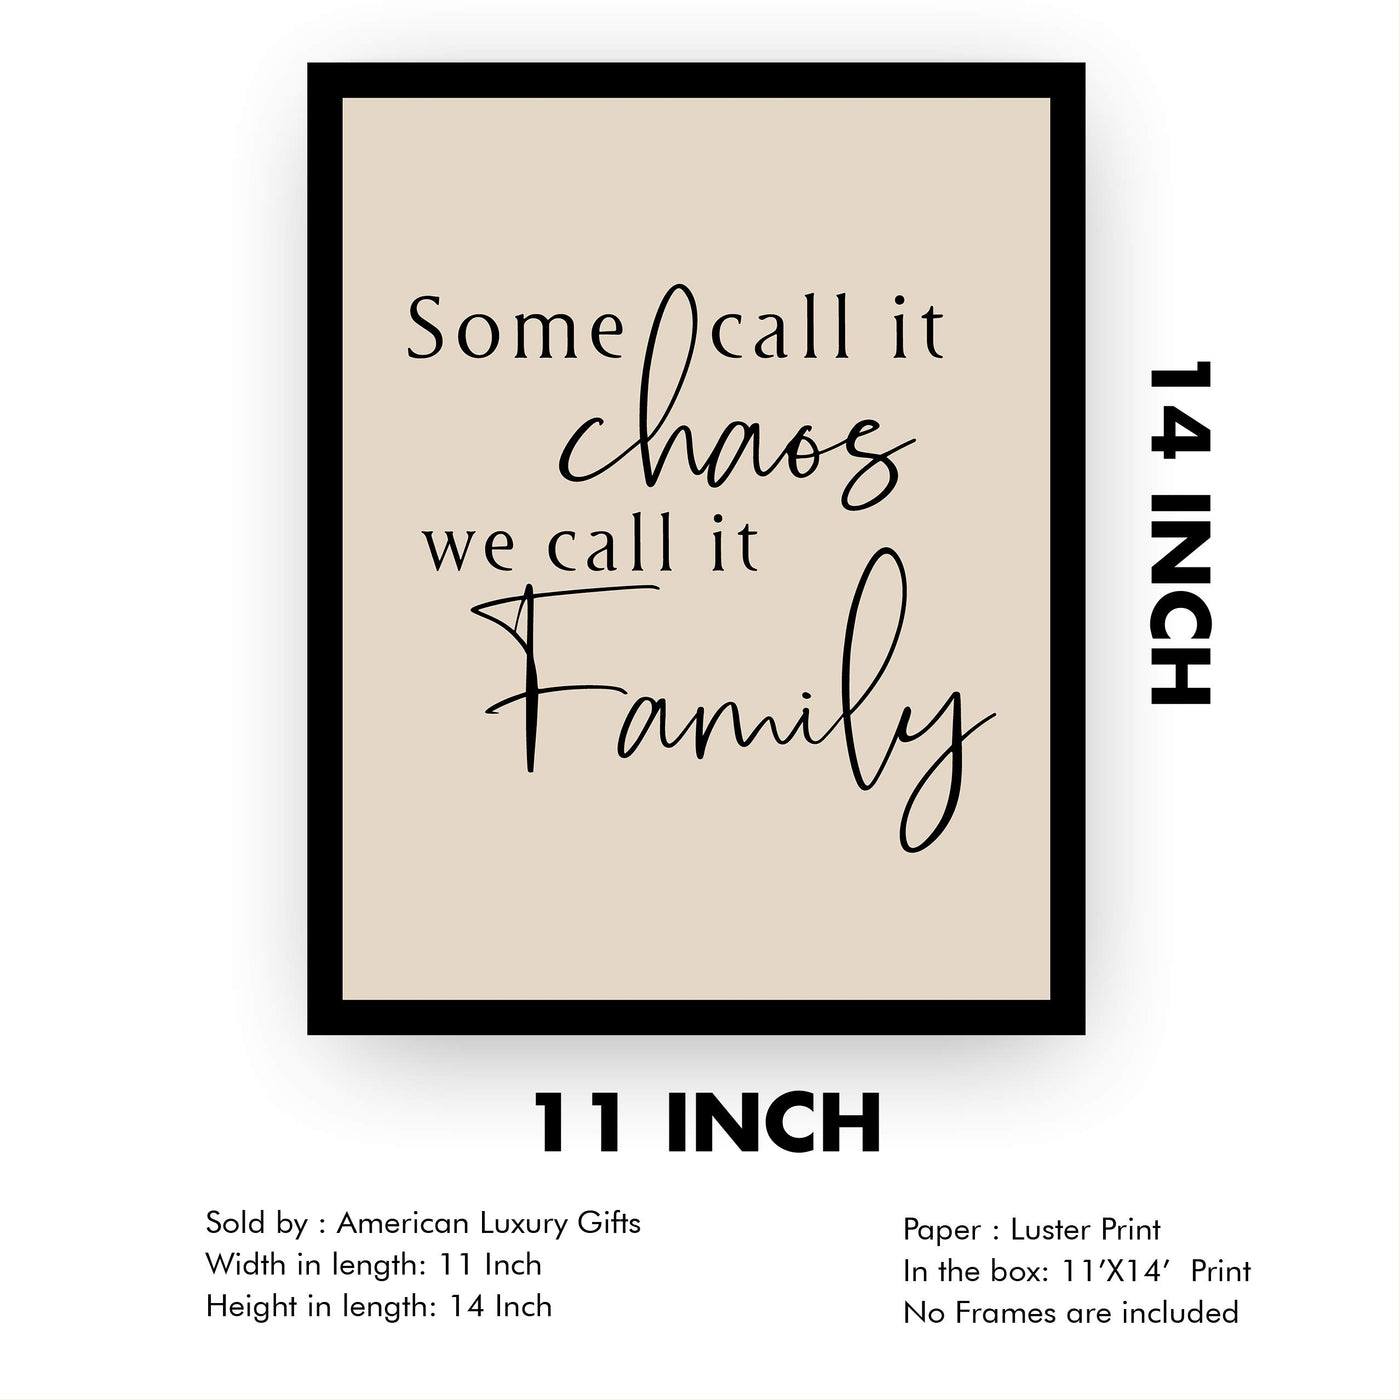 Some Call It Chaos-We Call It Family Inspirational Wall Decor -11 x 14" Modern Typographic Poster Print -Ready to Frame. Perfect Home-Welcome-Entryway-Farmhouse Decor. Great Sign for All Families!